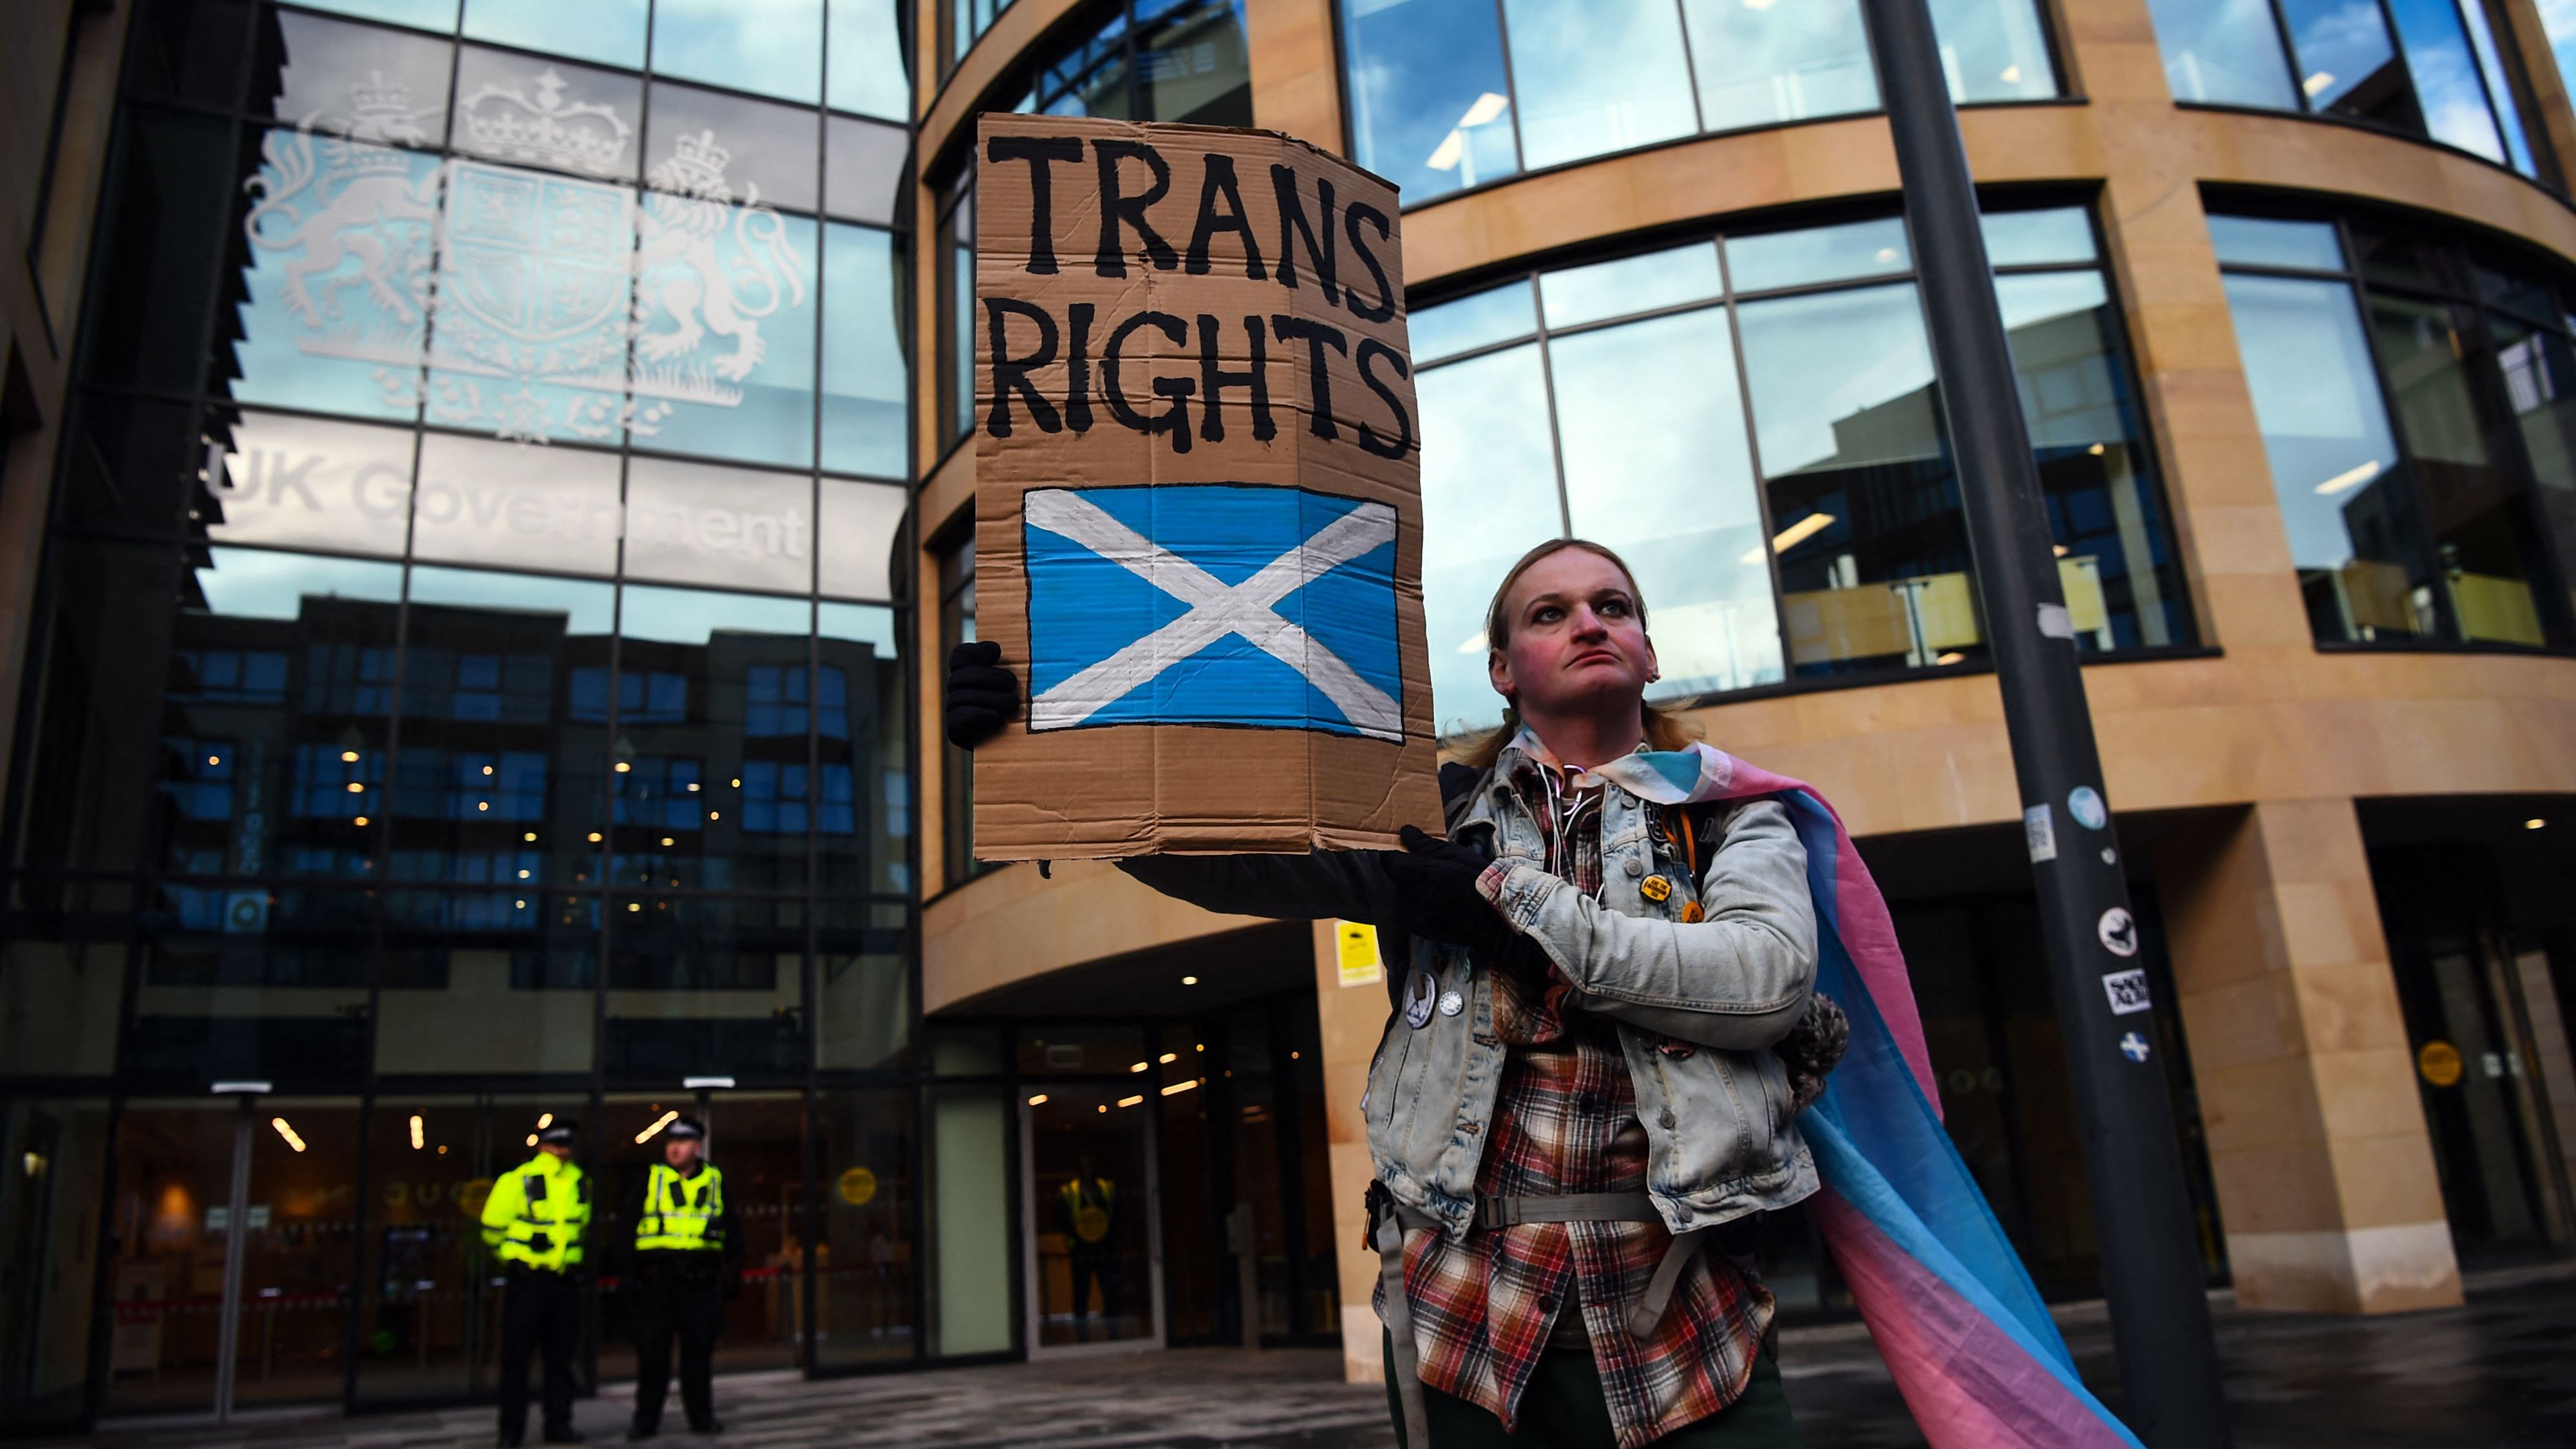 Transgender issues are controversial in Scotland